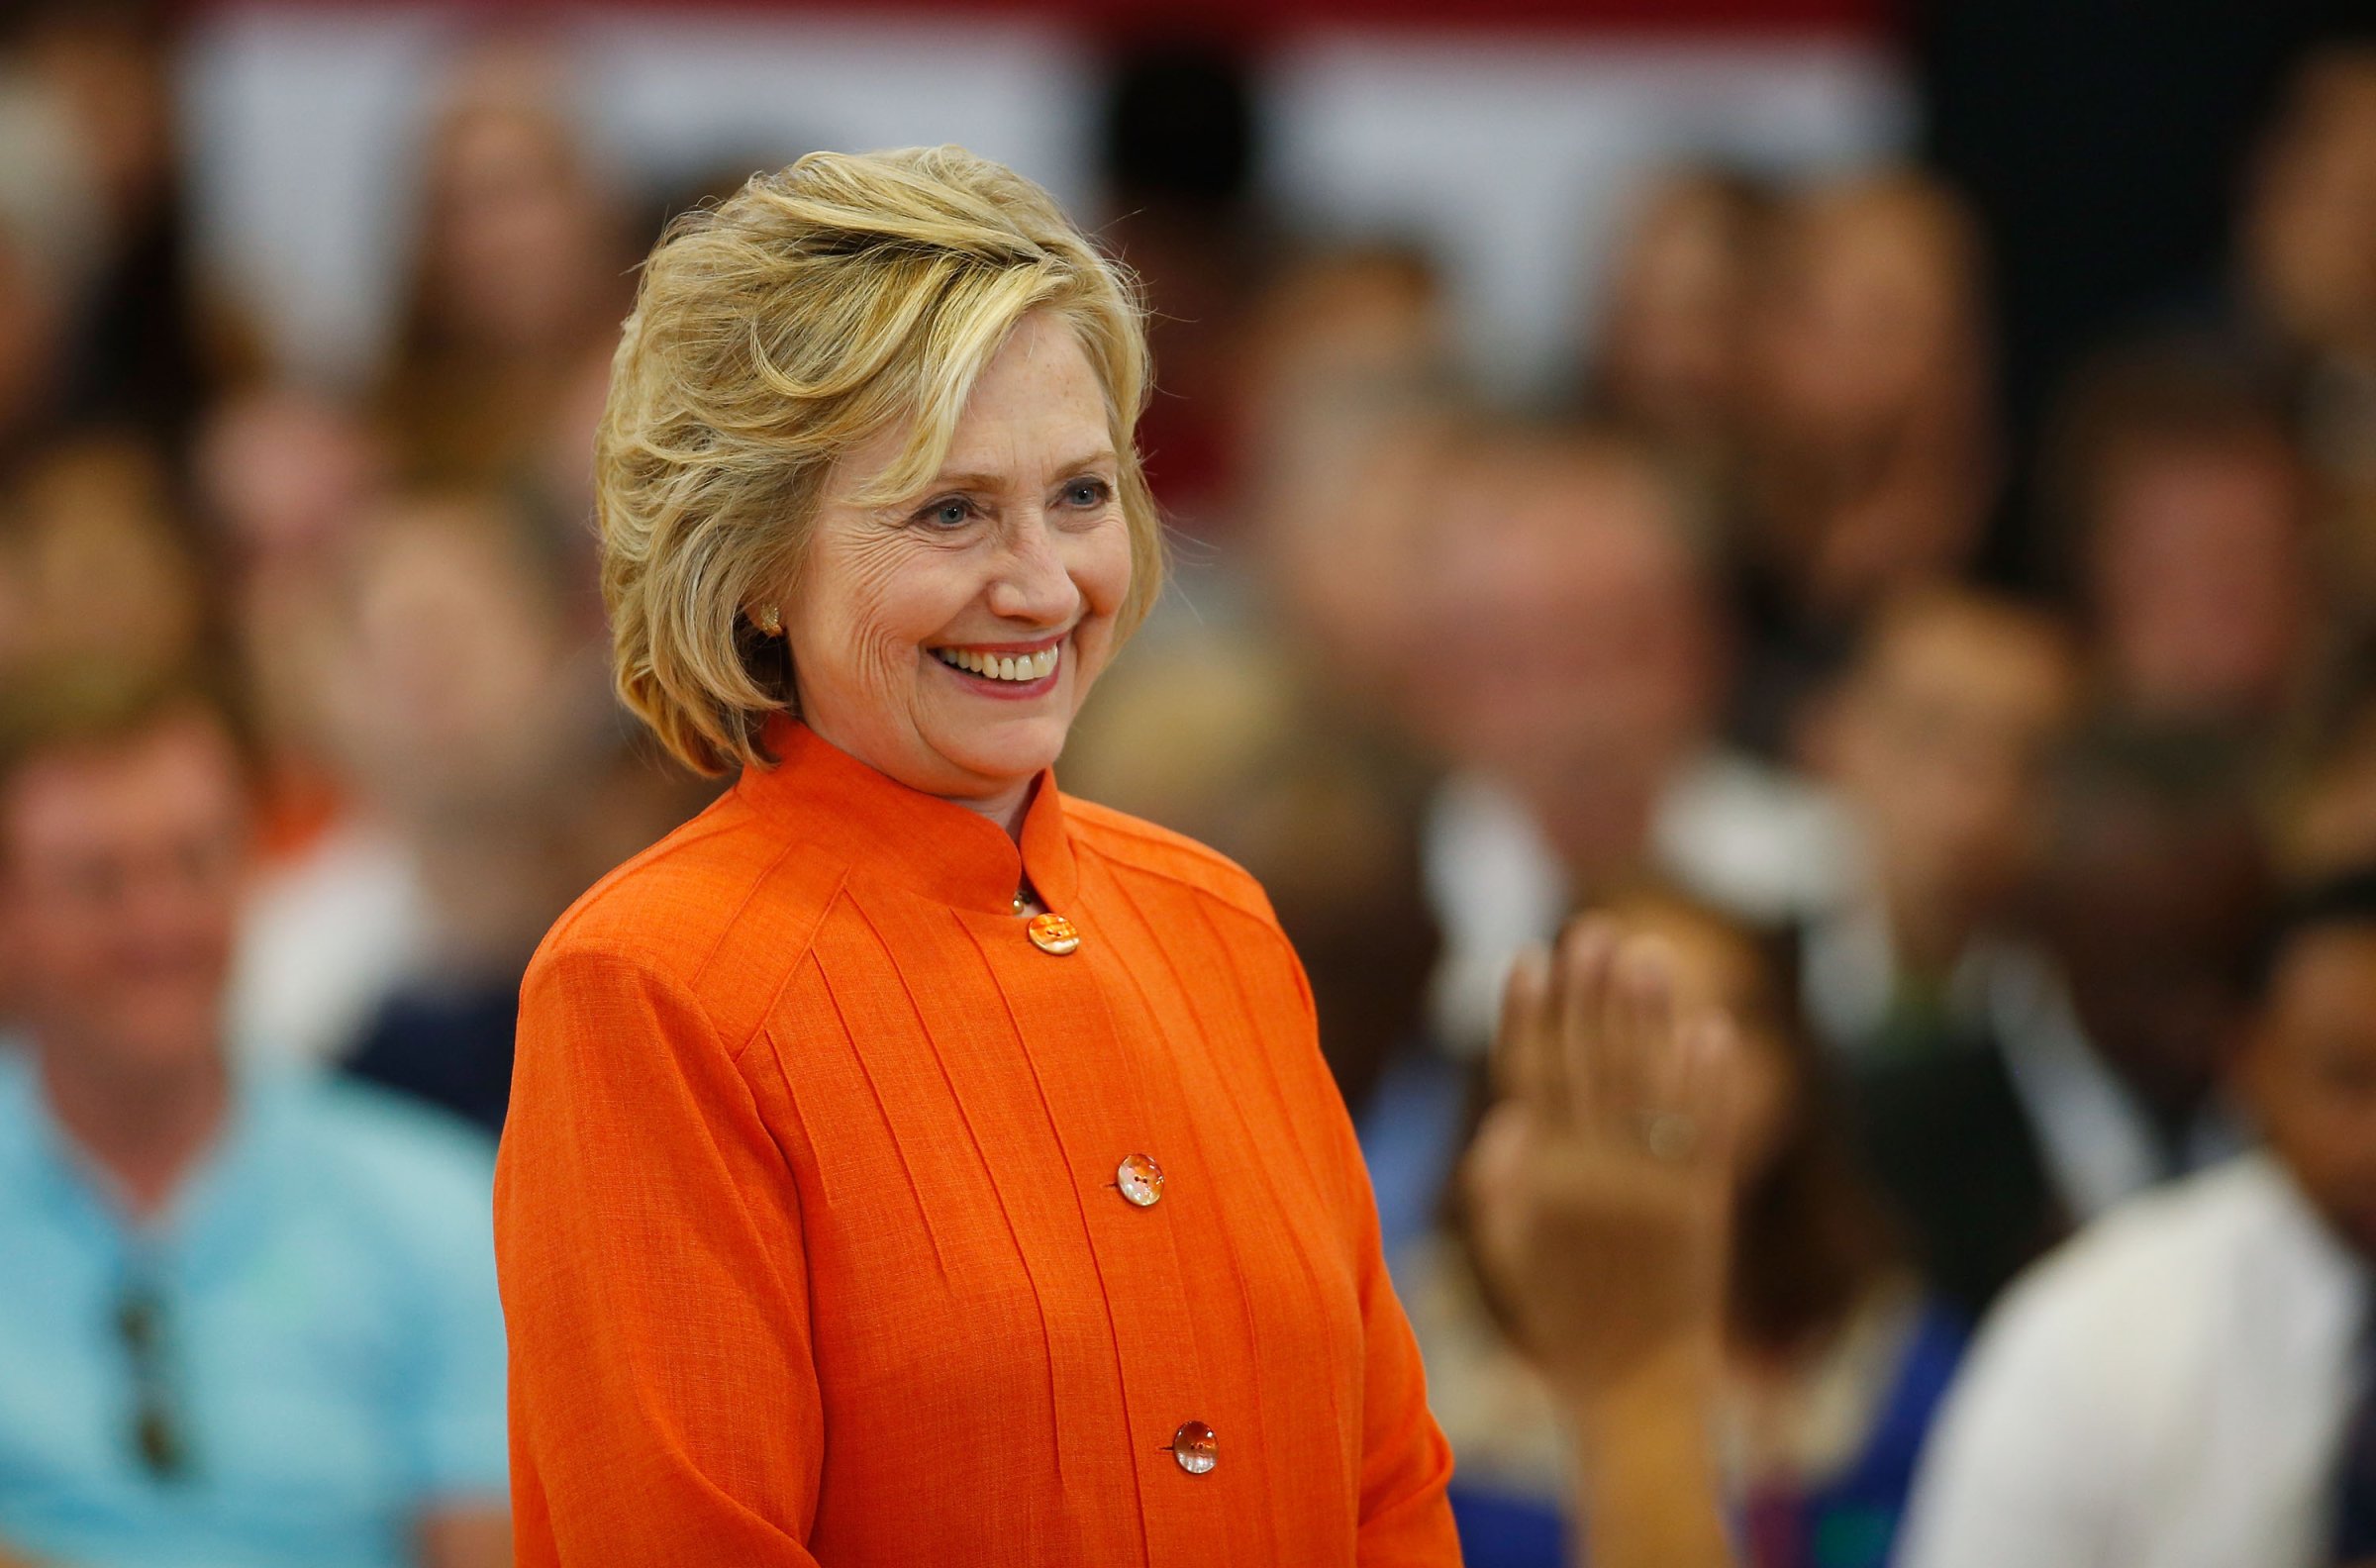 Democratic presidential candidate and former U.S. Secretary of State Hillary Clinton delivers remarks during a campaign stop at Dr. William U. Pearson Community Center on August 18, 2015 in North Las Vegas, Nevada.